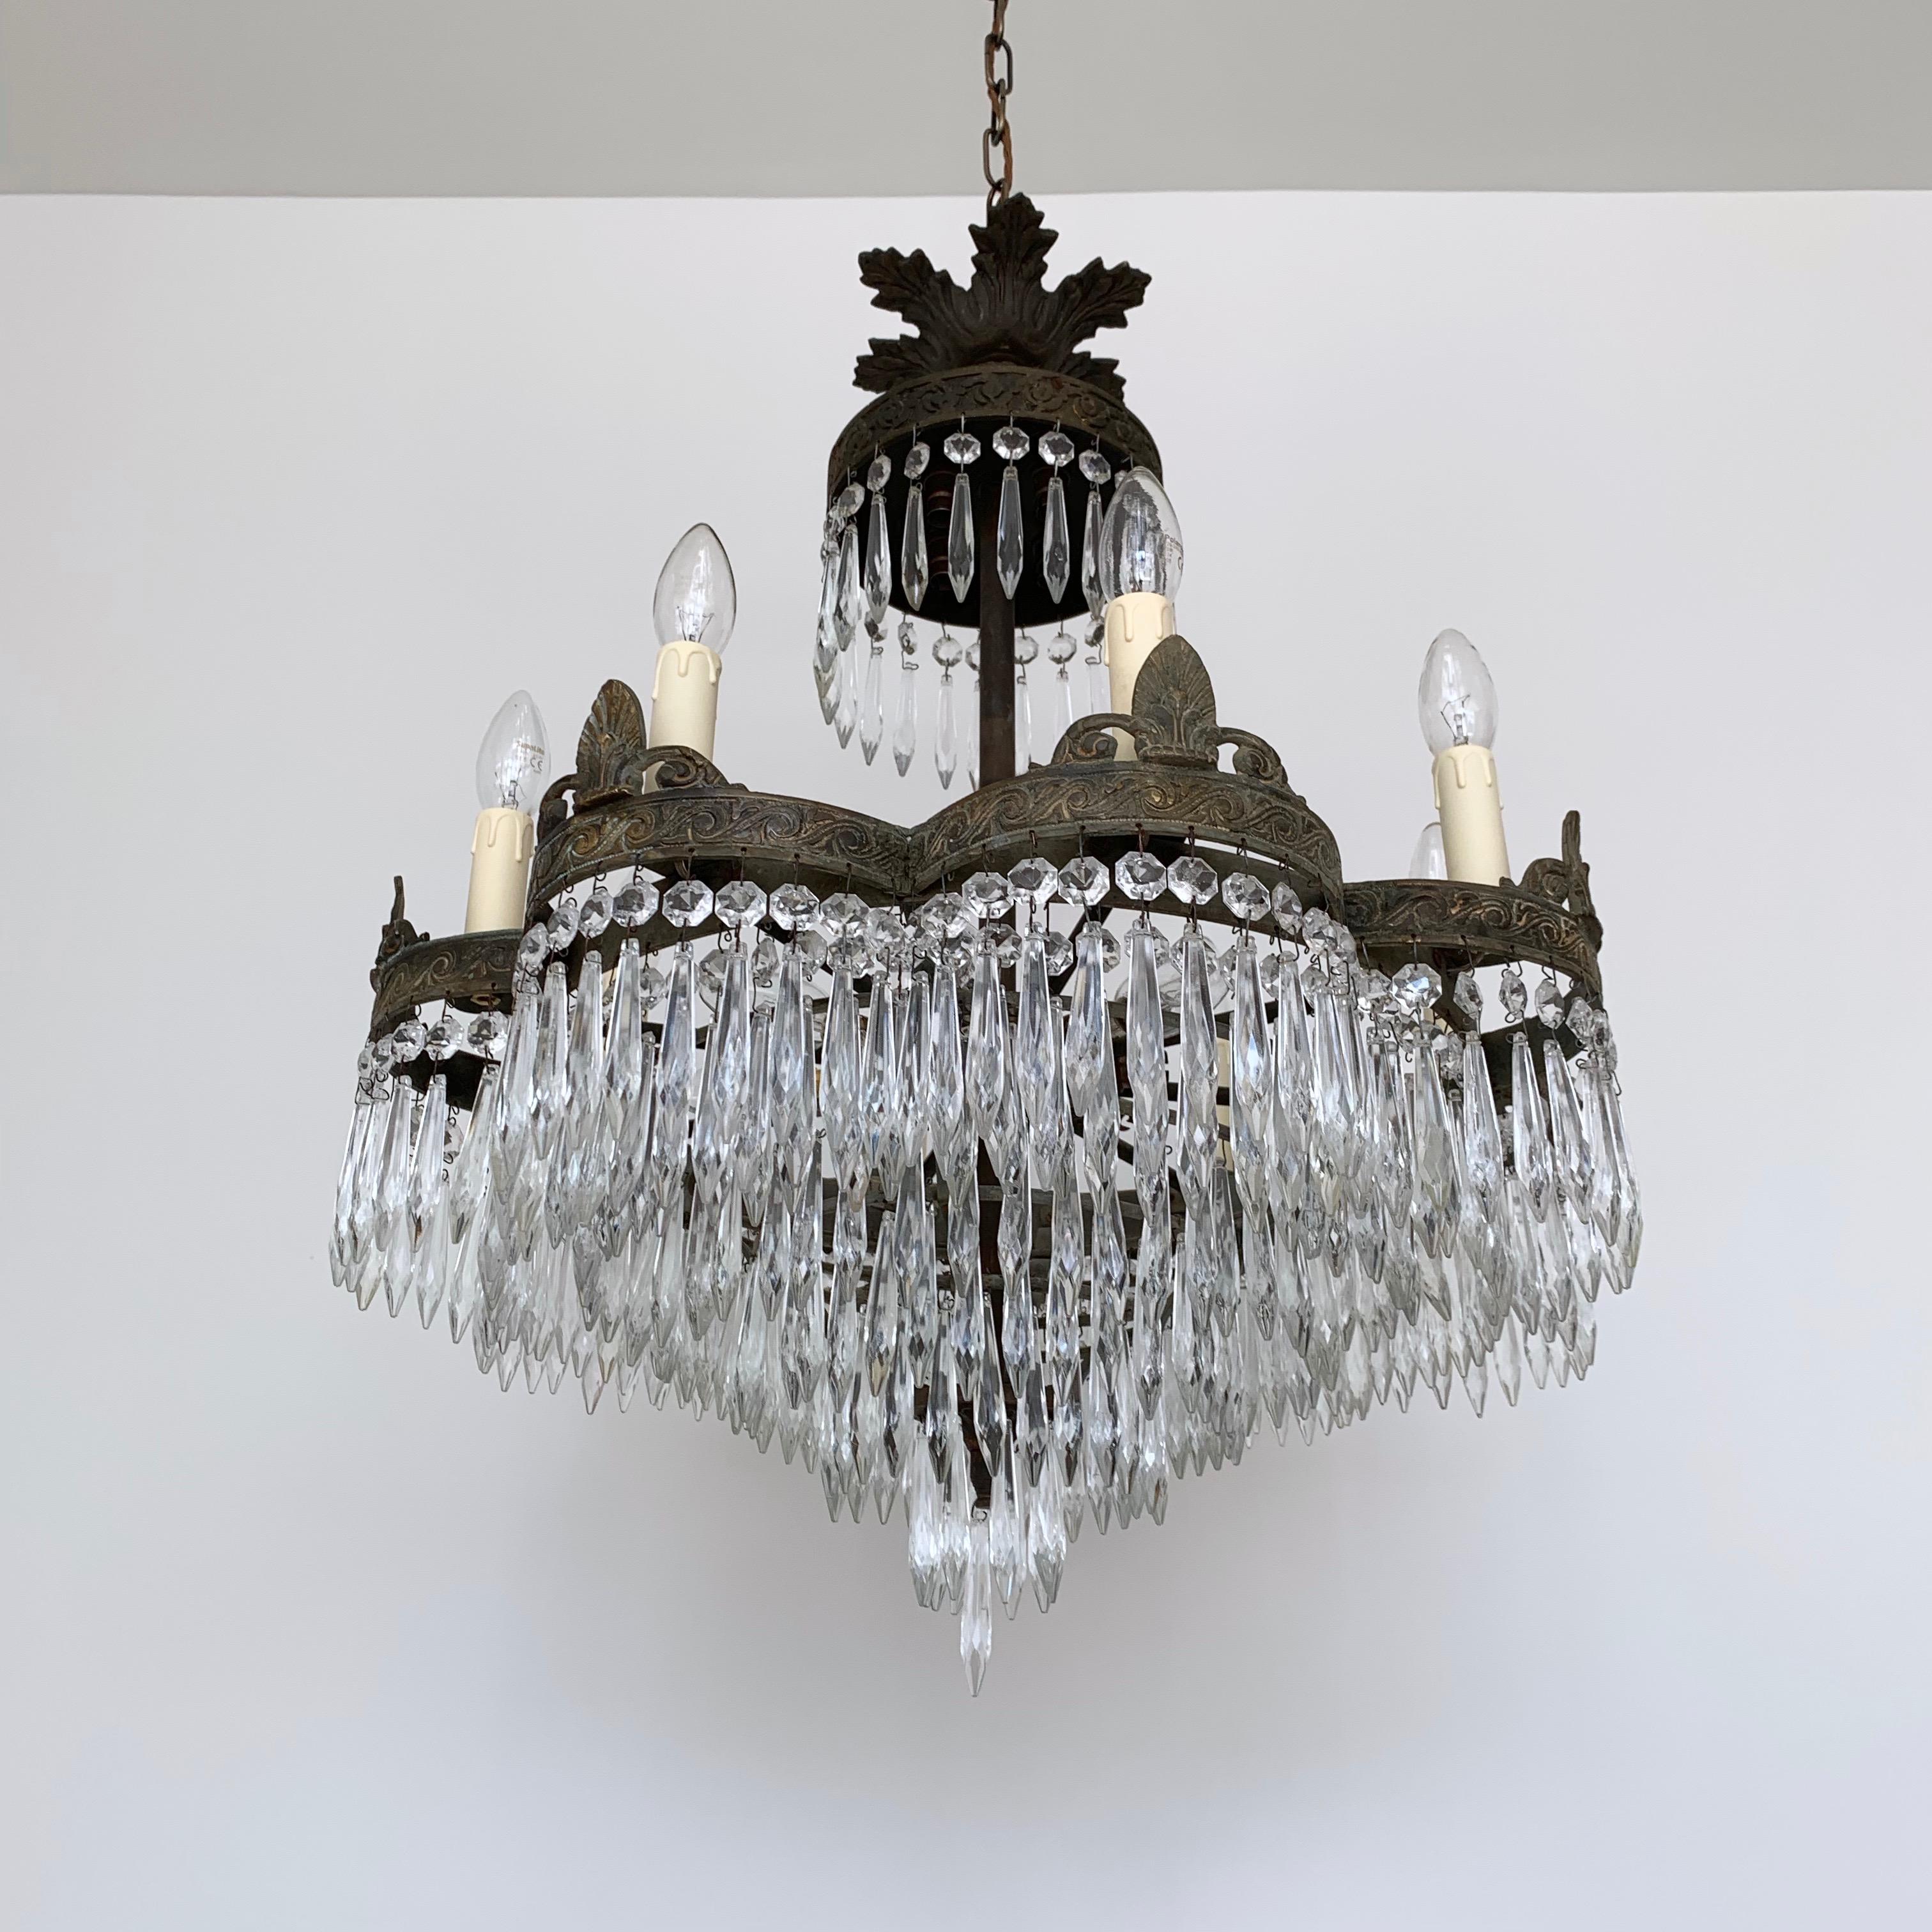 Early 1900s French Waterfall Petal Frame Chandelier with Glass Icicle Drops In Good Condition For Sale In Stockport, GB